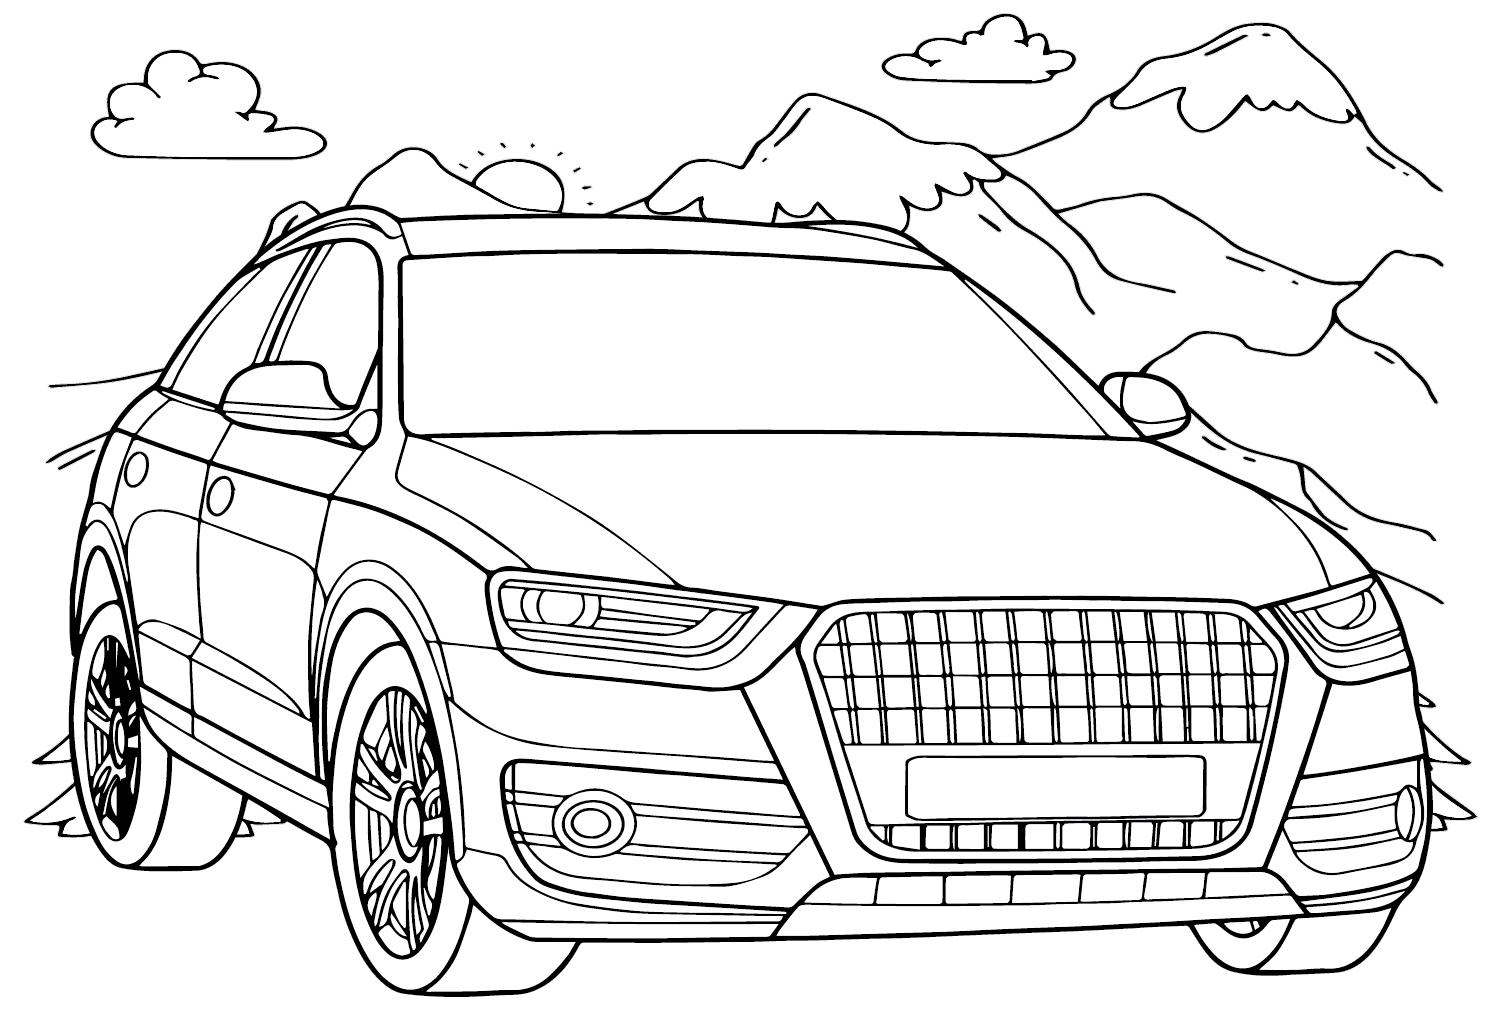 Coloring Page Audi Q5 from Audi